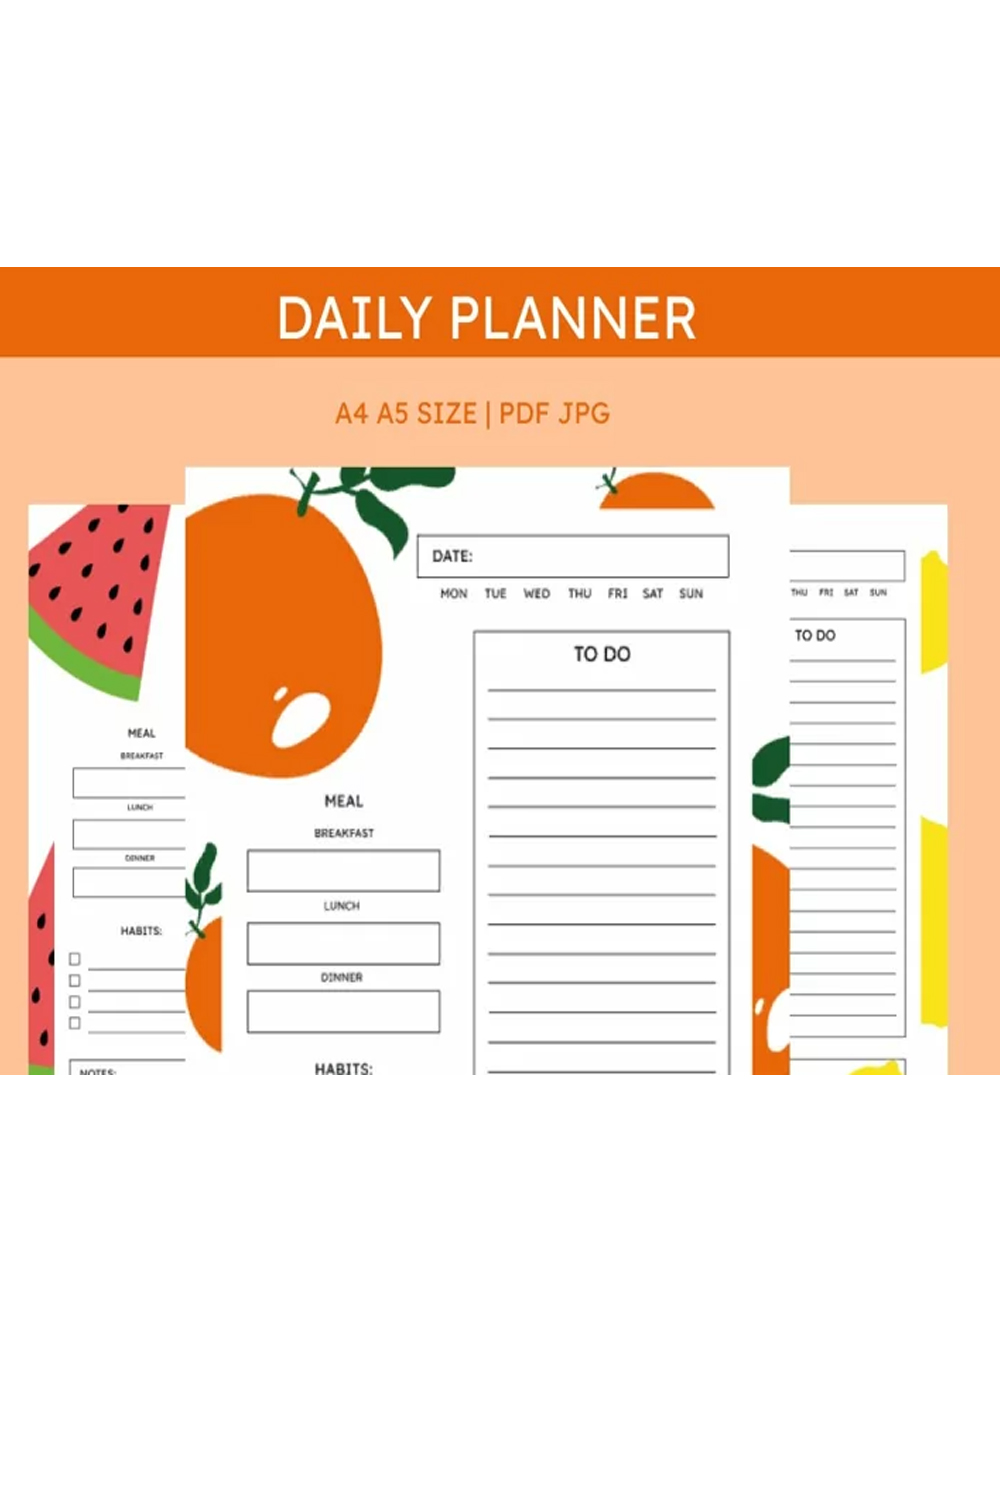 Daily planner printable | Cute daily planner pinterest preview image.